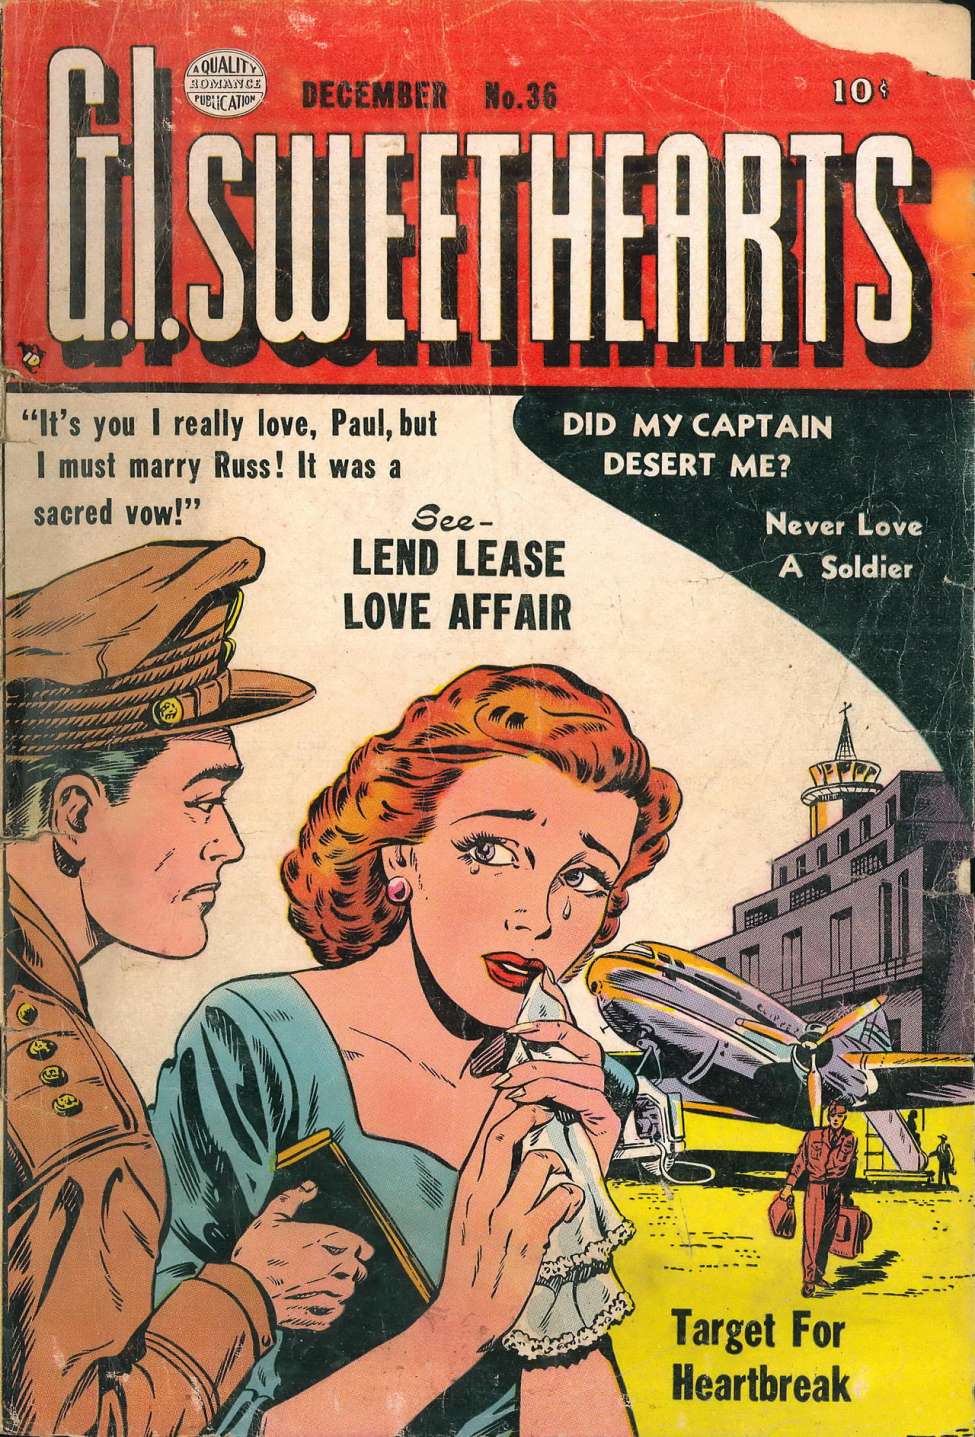 Comic Book Cover For G.I. Sweethearts 36